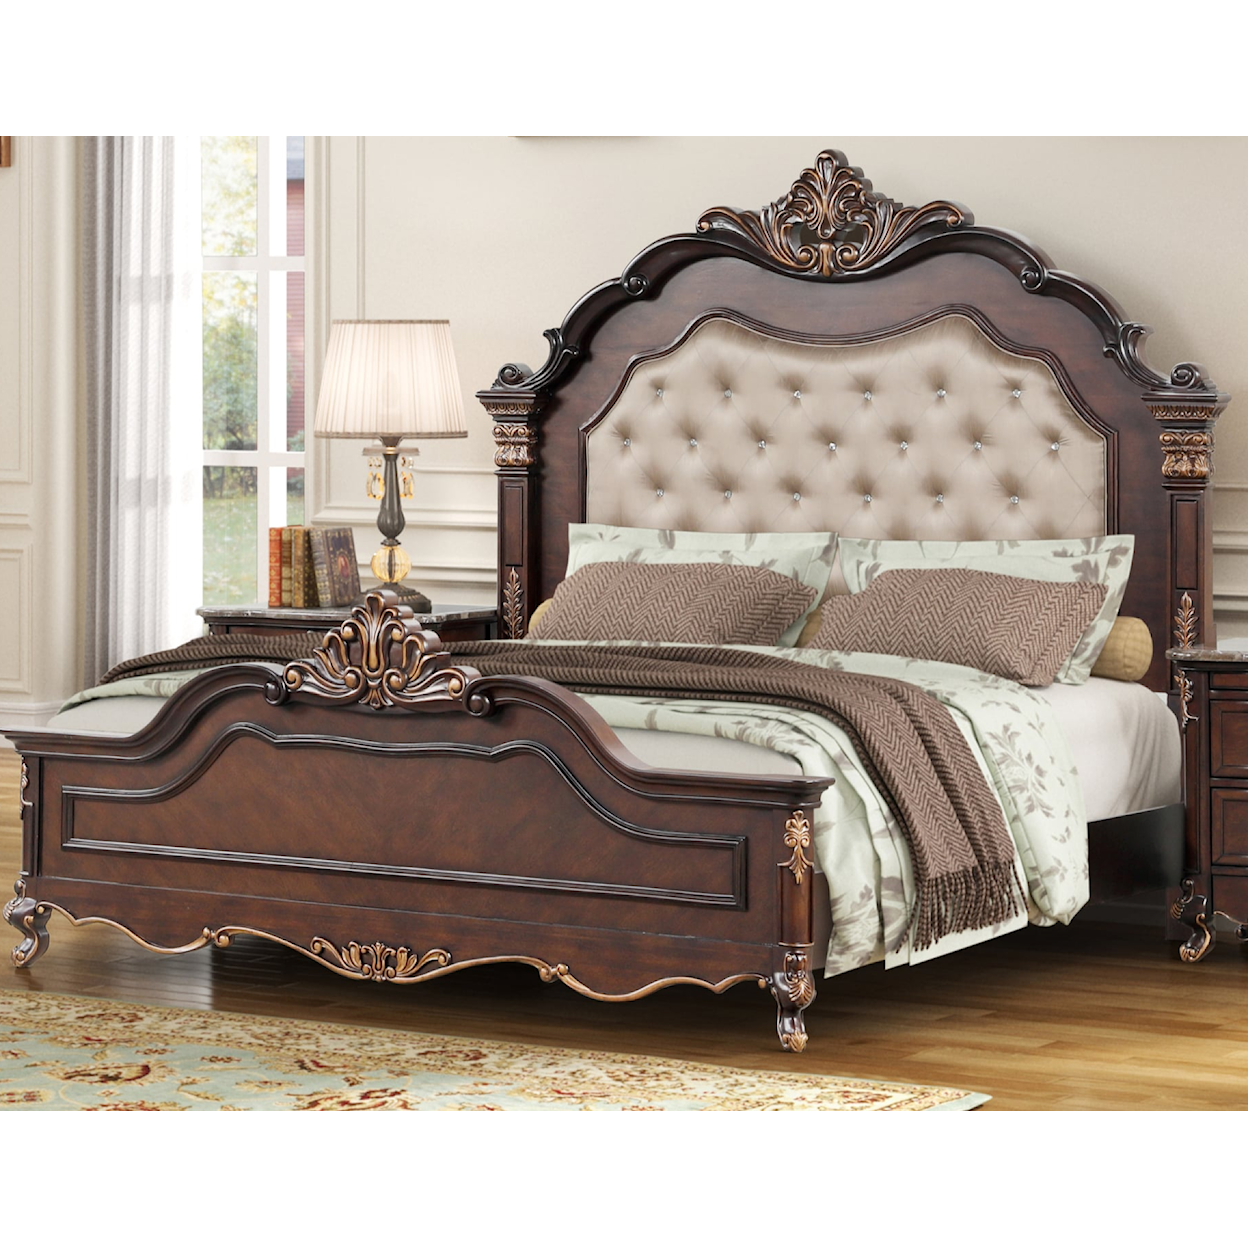 New Classic Constantine Bed King